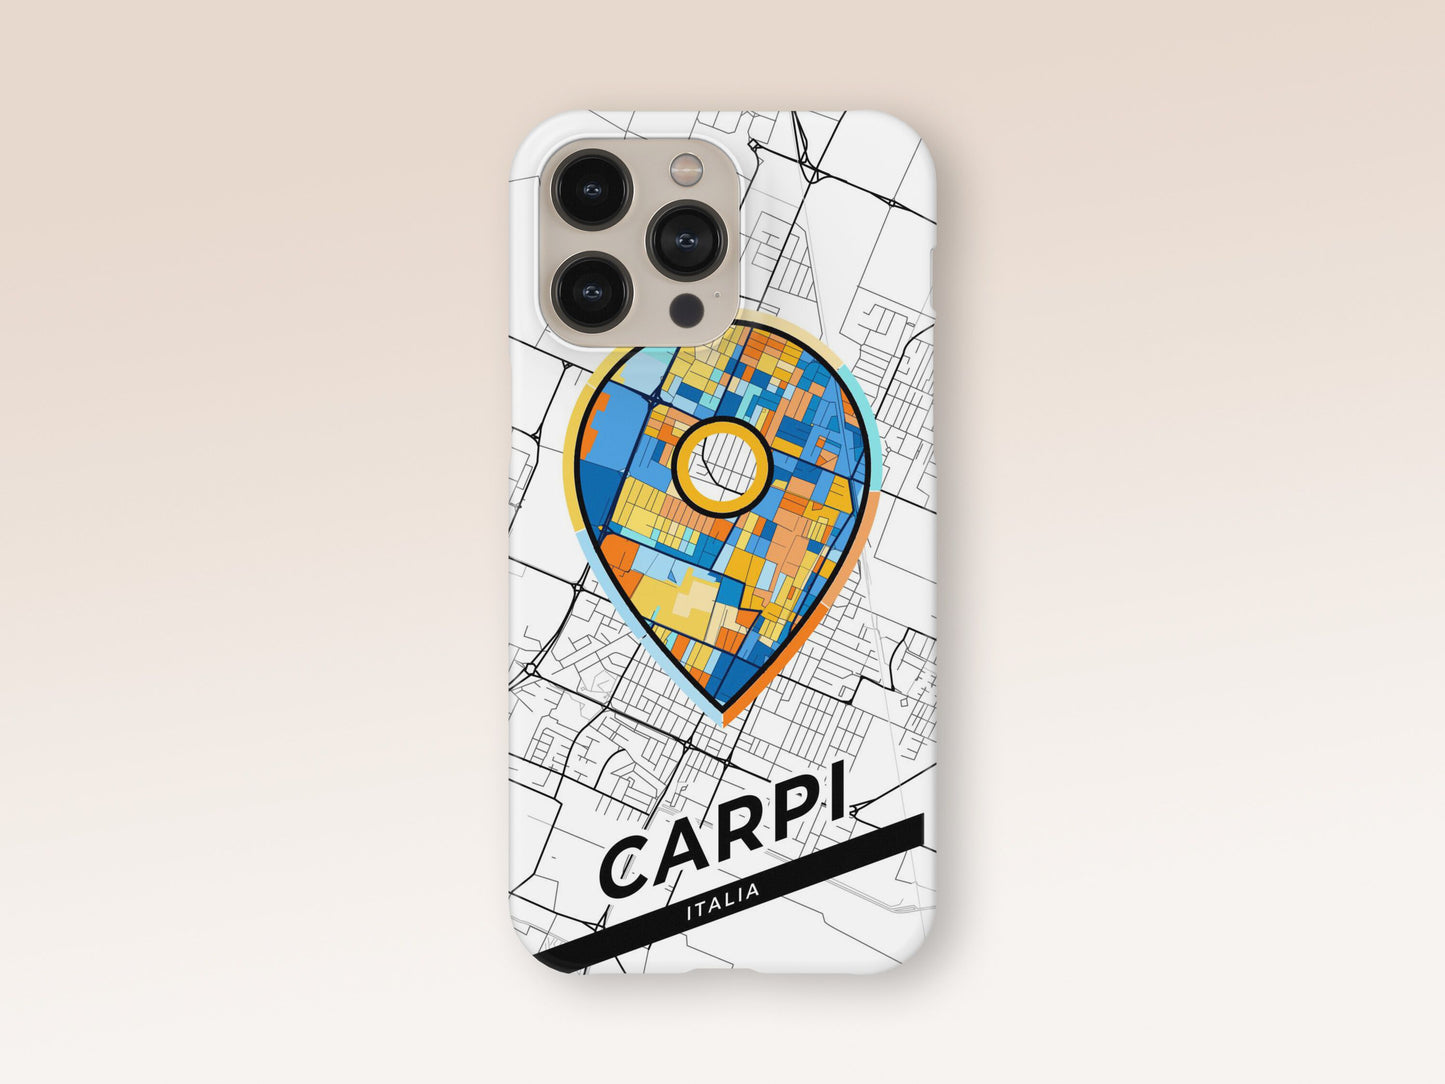 Carpi Italy slim phone case with colorful icon. Birthday, wedding or housewarming gift. Couple match cases. 1